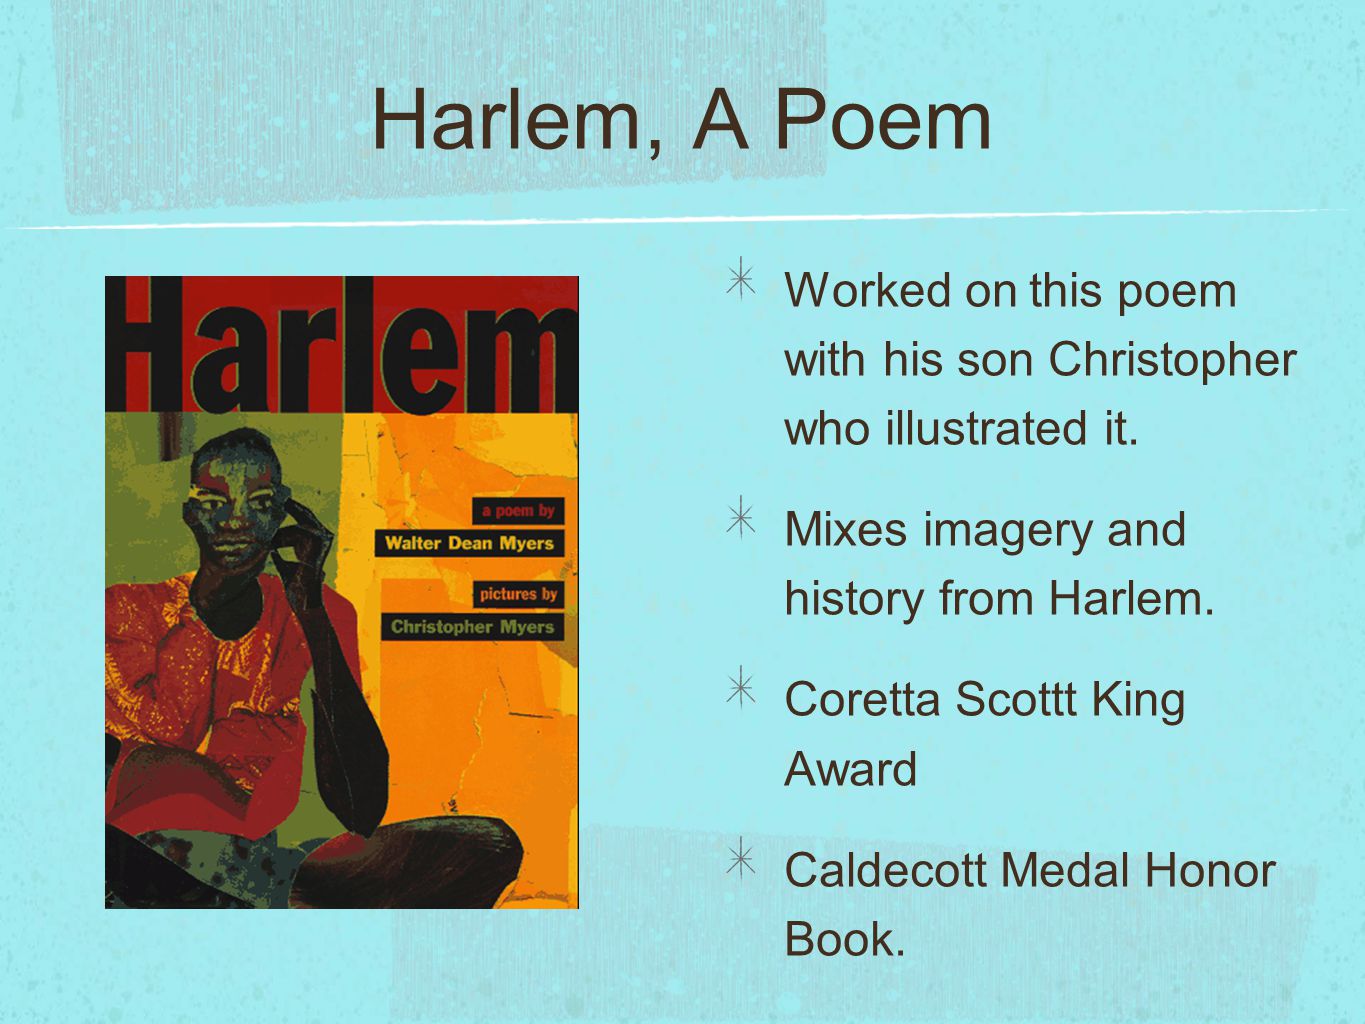 Harlem, A Poem Worked on this poem with his son Christopher who illustrated it.